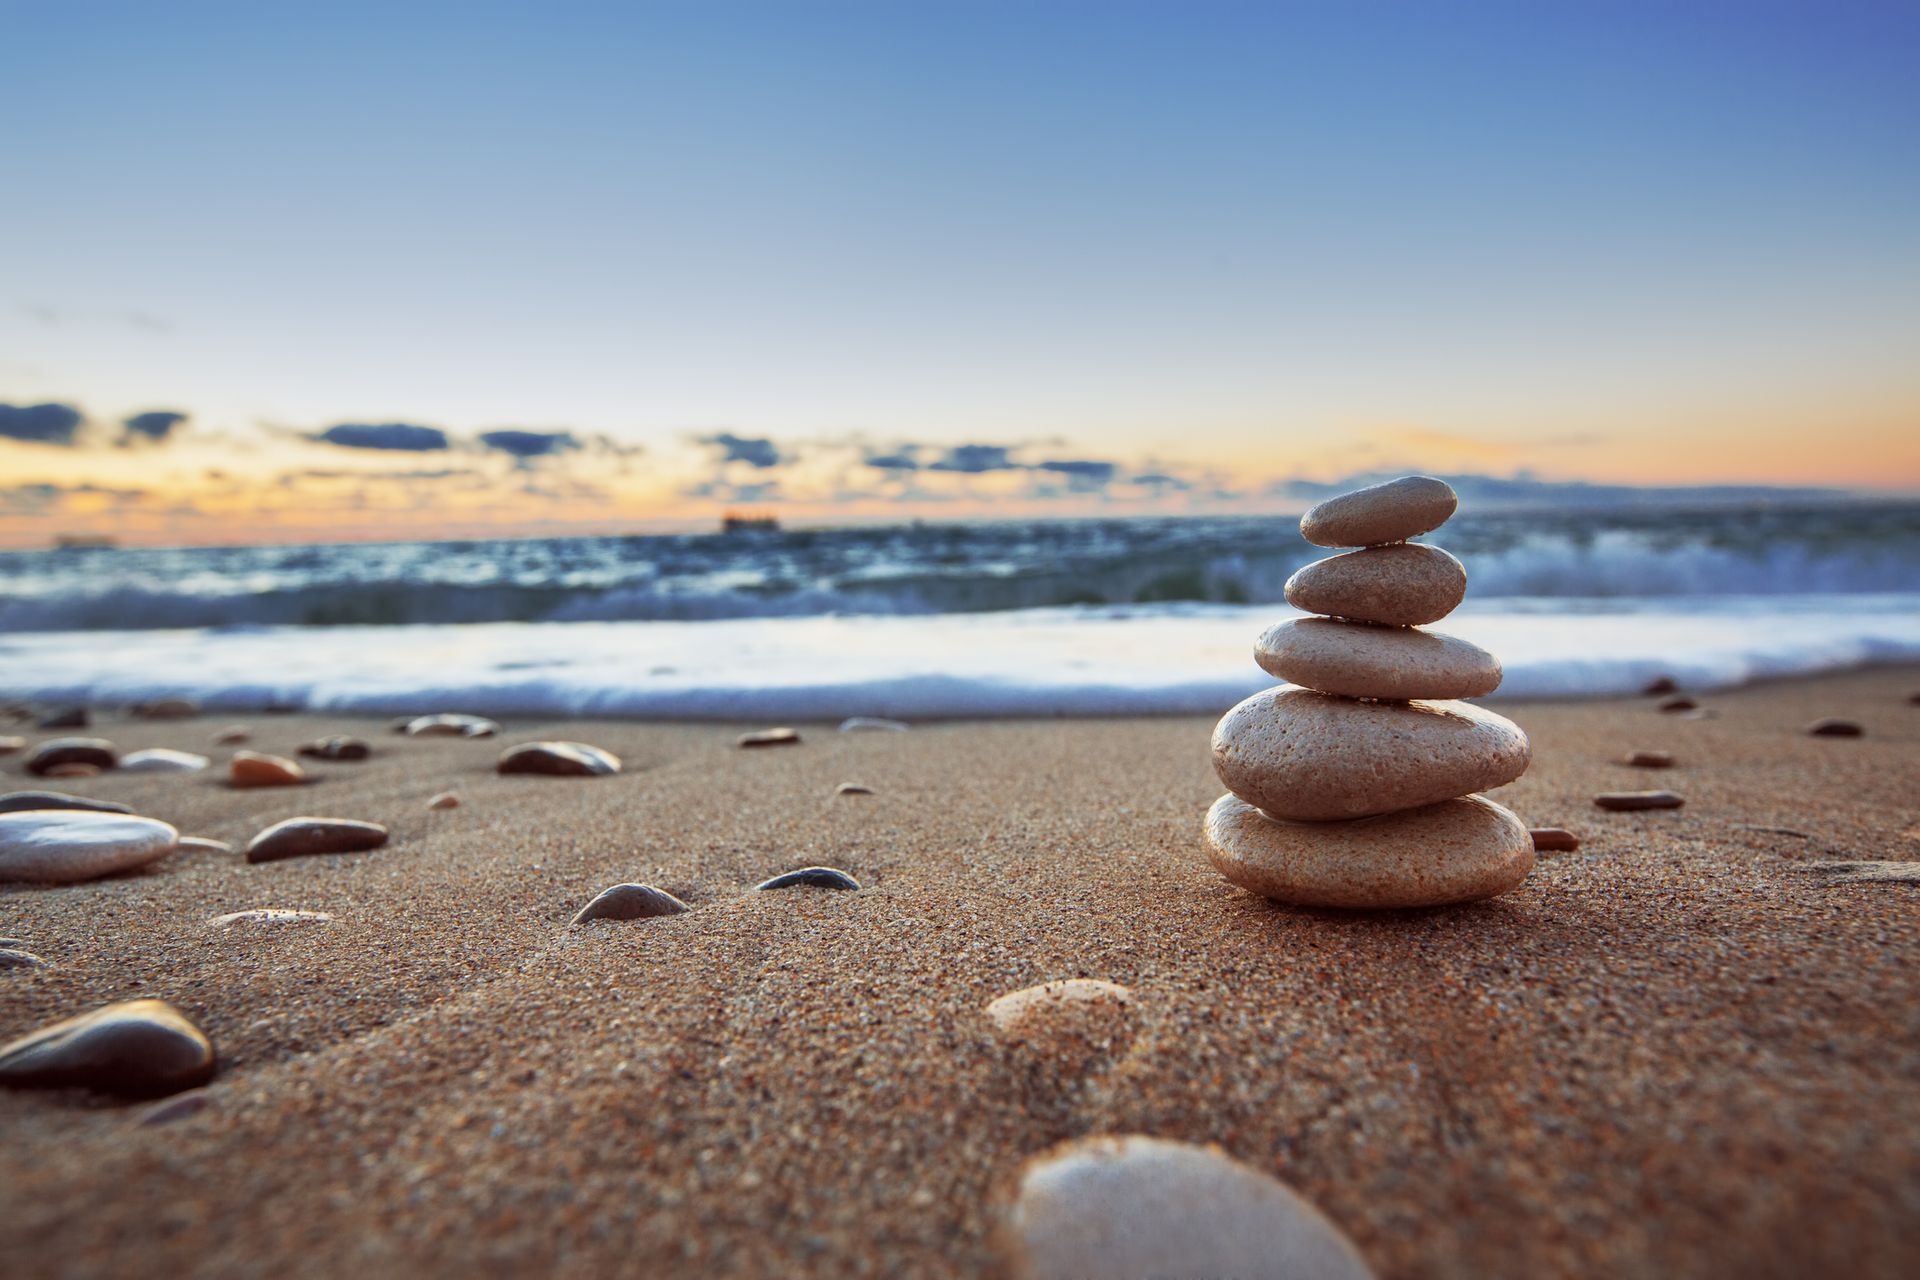 A calm beach at sunset with a stack of rocks on the sand.